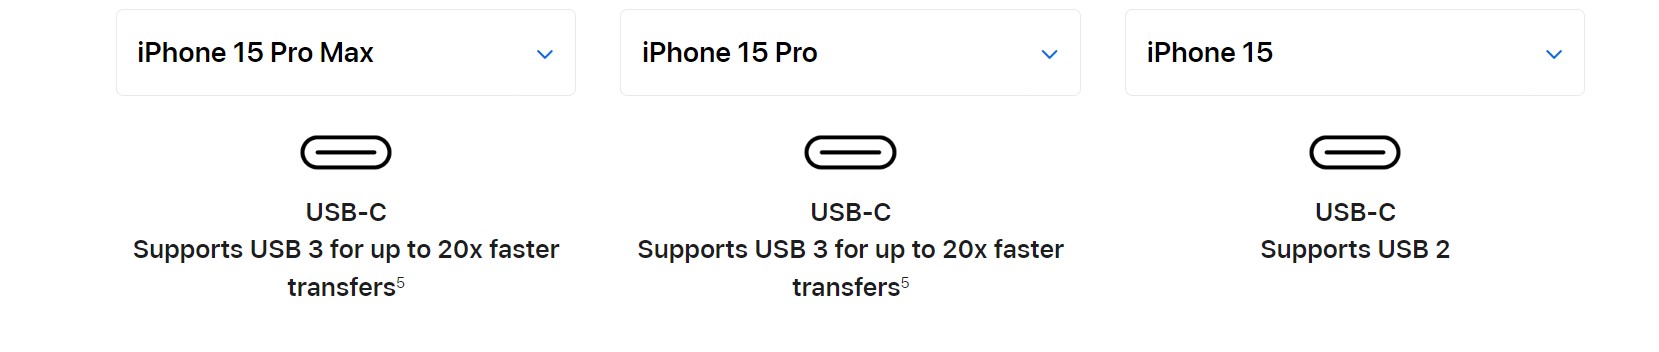 For some reason, Apple capped the standard iPhone 15's data transfer to USB 2 rates which goes up to 480Mbps. 